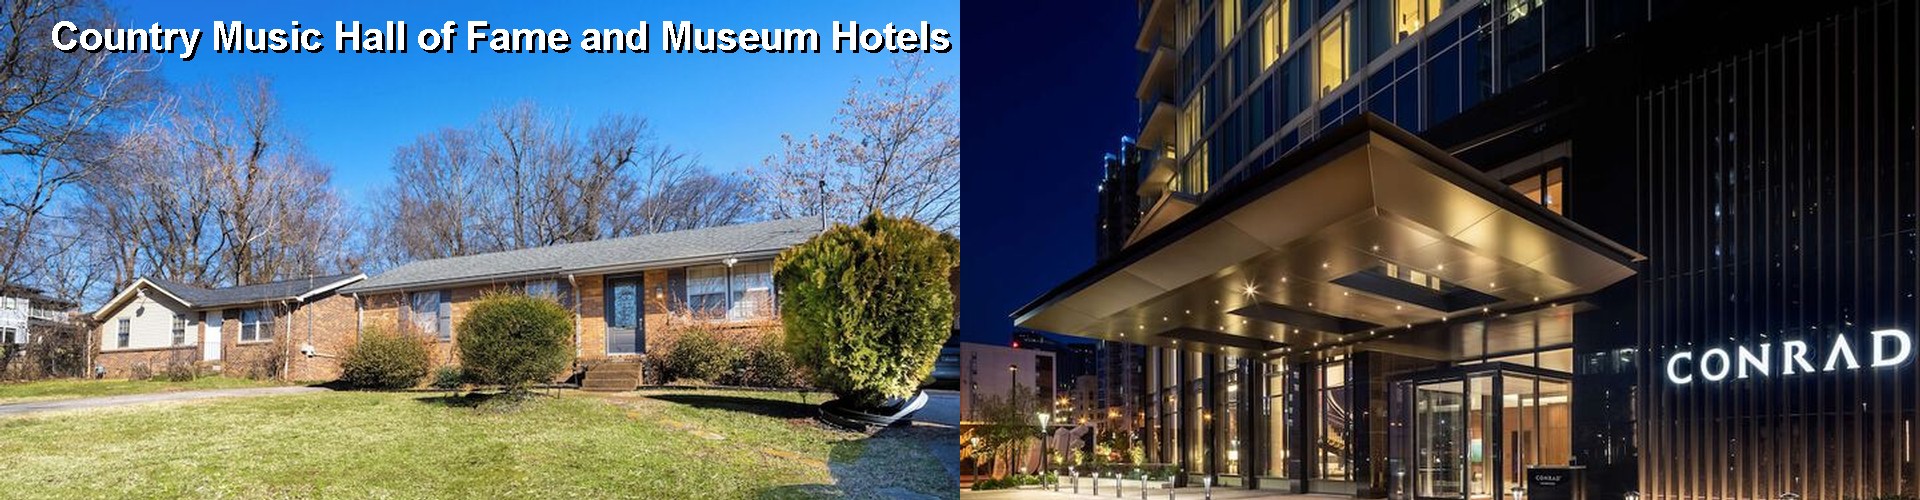 5 Best Hotels near Country Music Hall of Fame and Museum